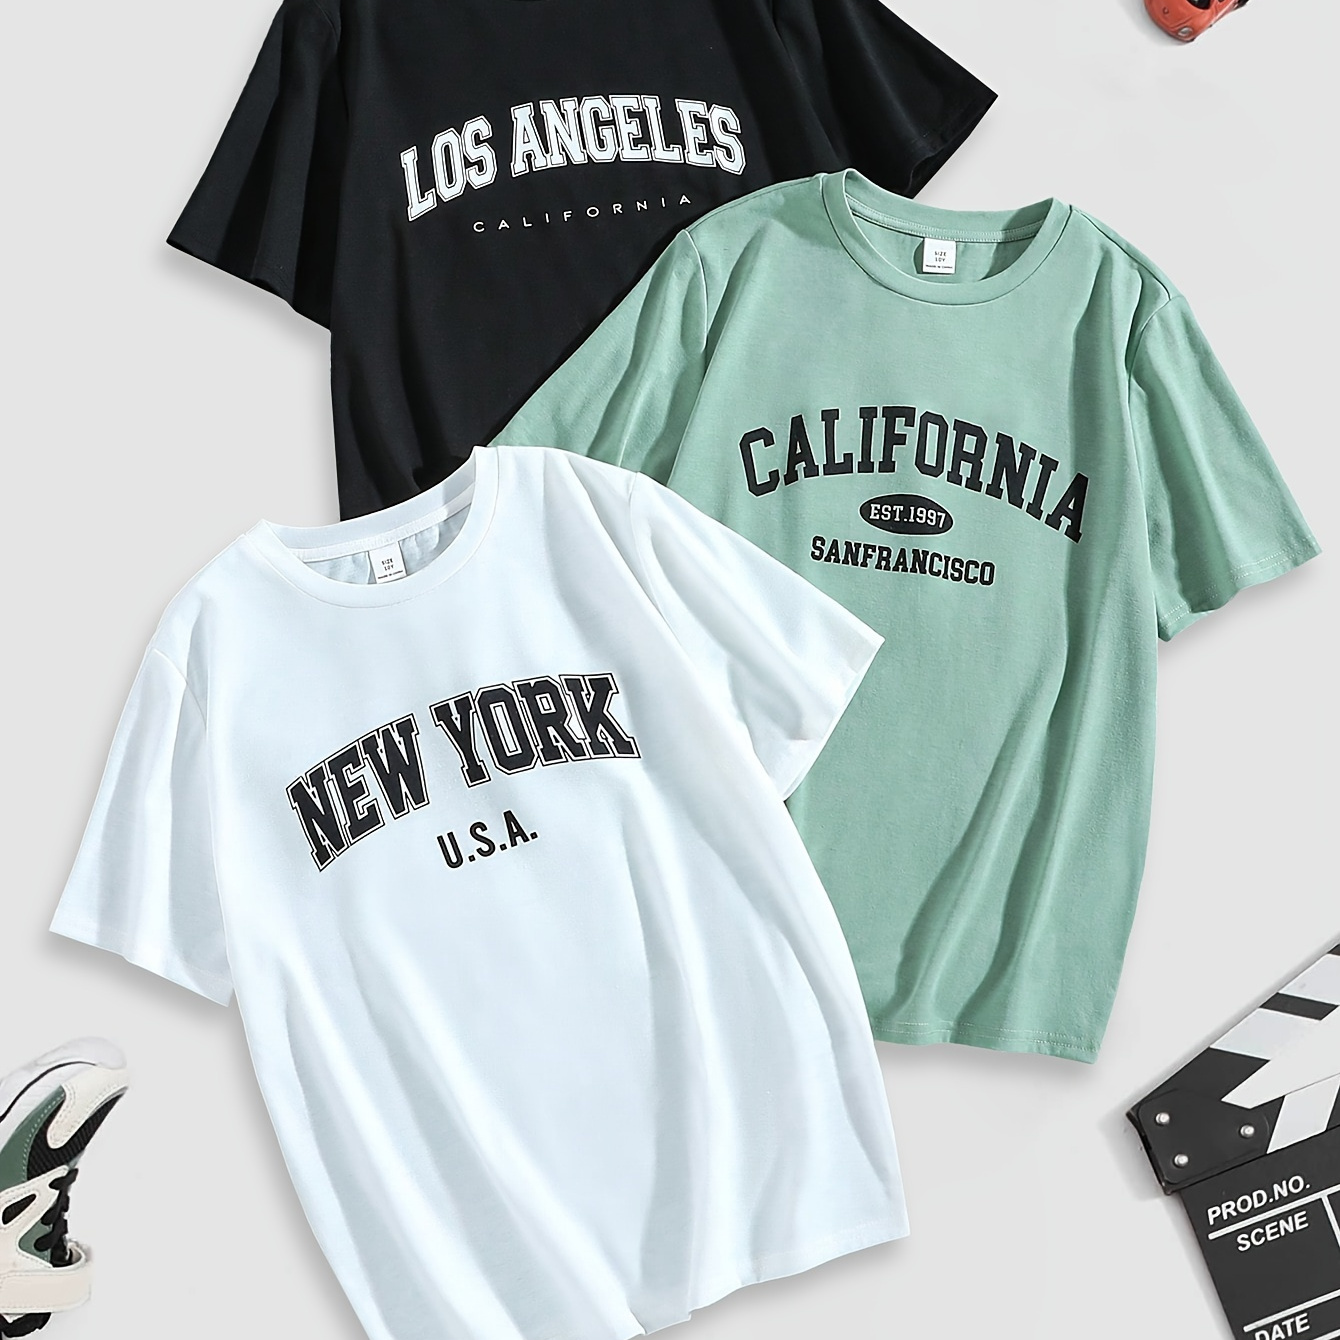 

3pcs Los Angeles&new York&california Letter Print Boys Casual Short Sleeve T-shirts - Comfortable & Stylish Tops For Summer - Ideal Gift For Your Fashionistas